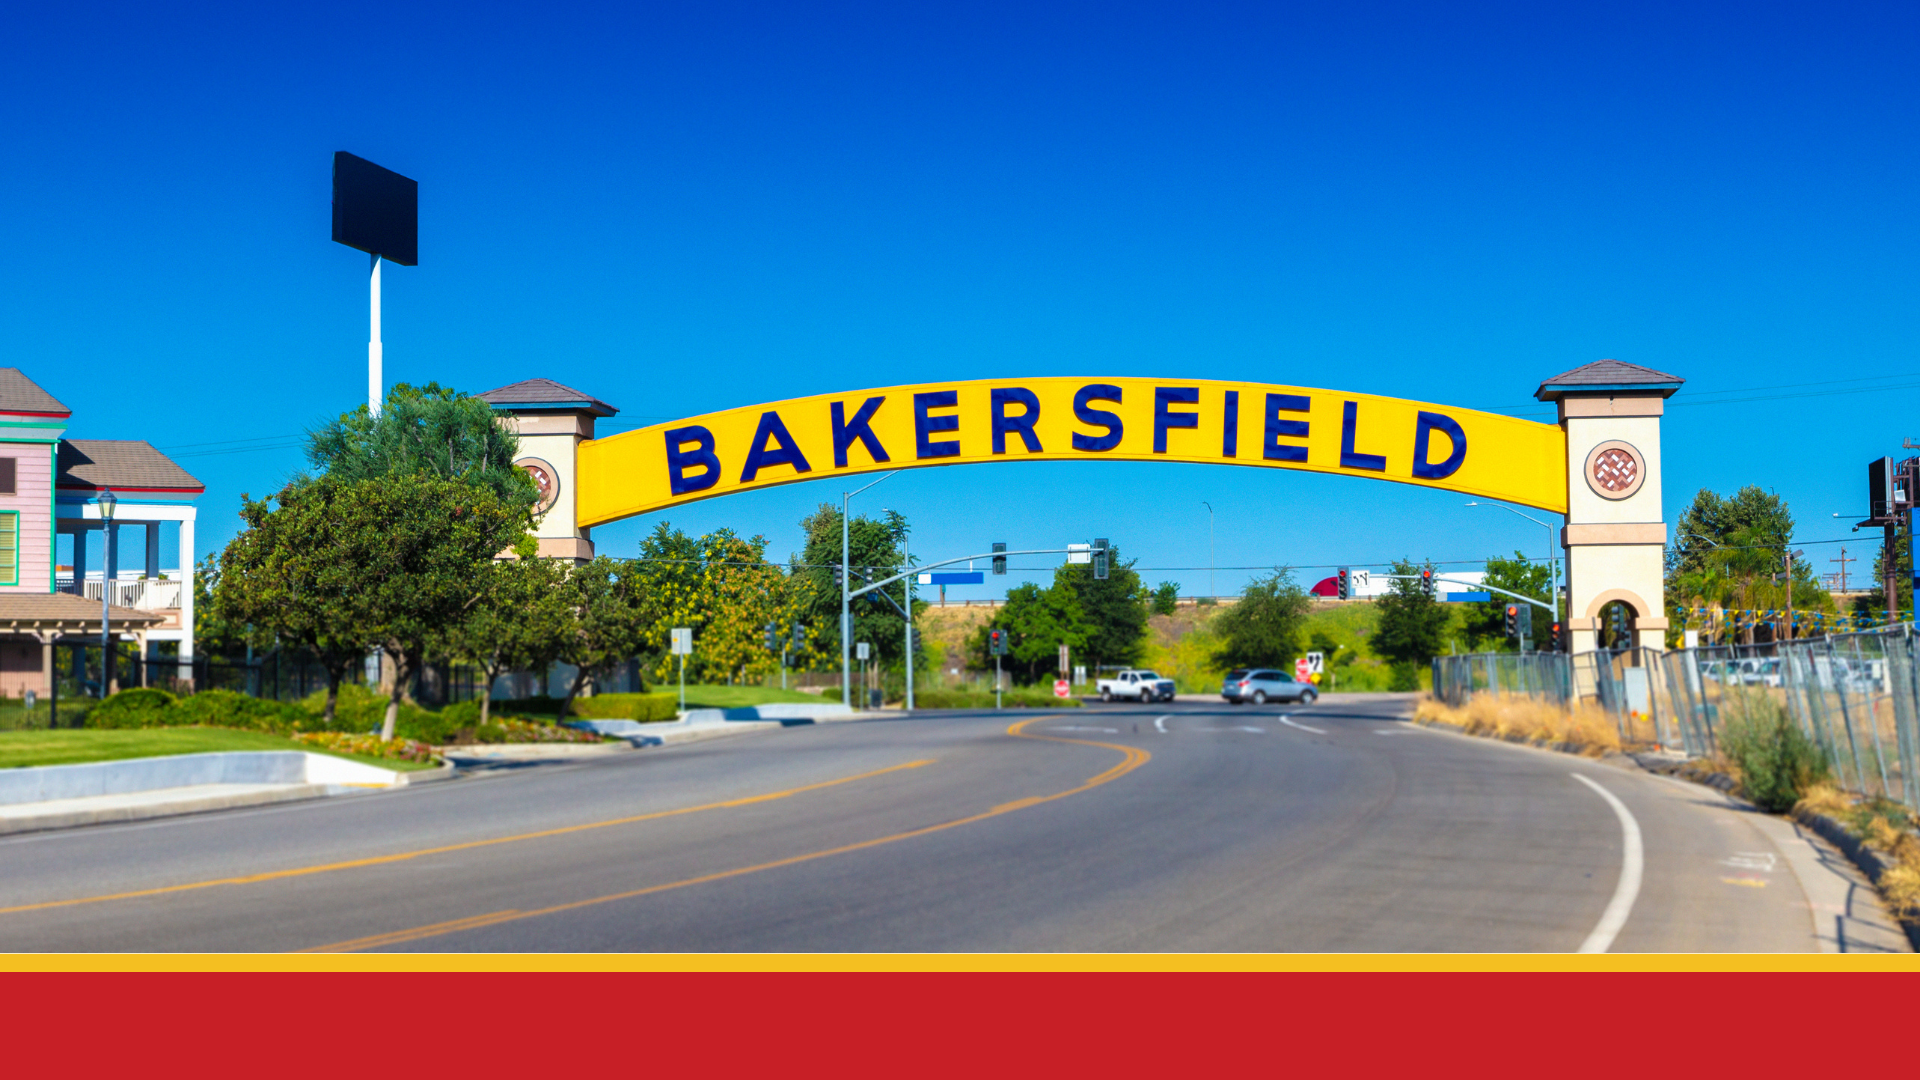 City of Bakersfield road sign